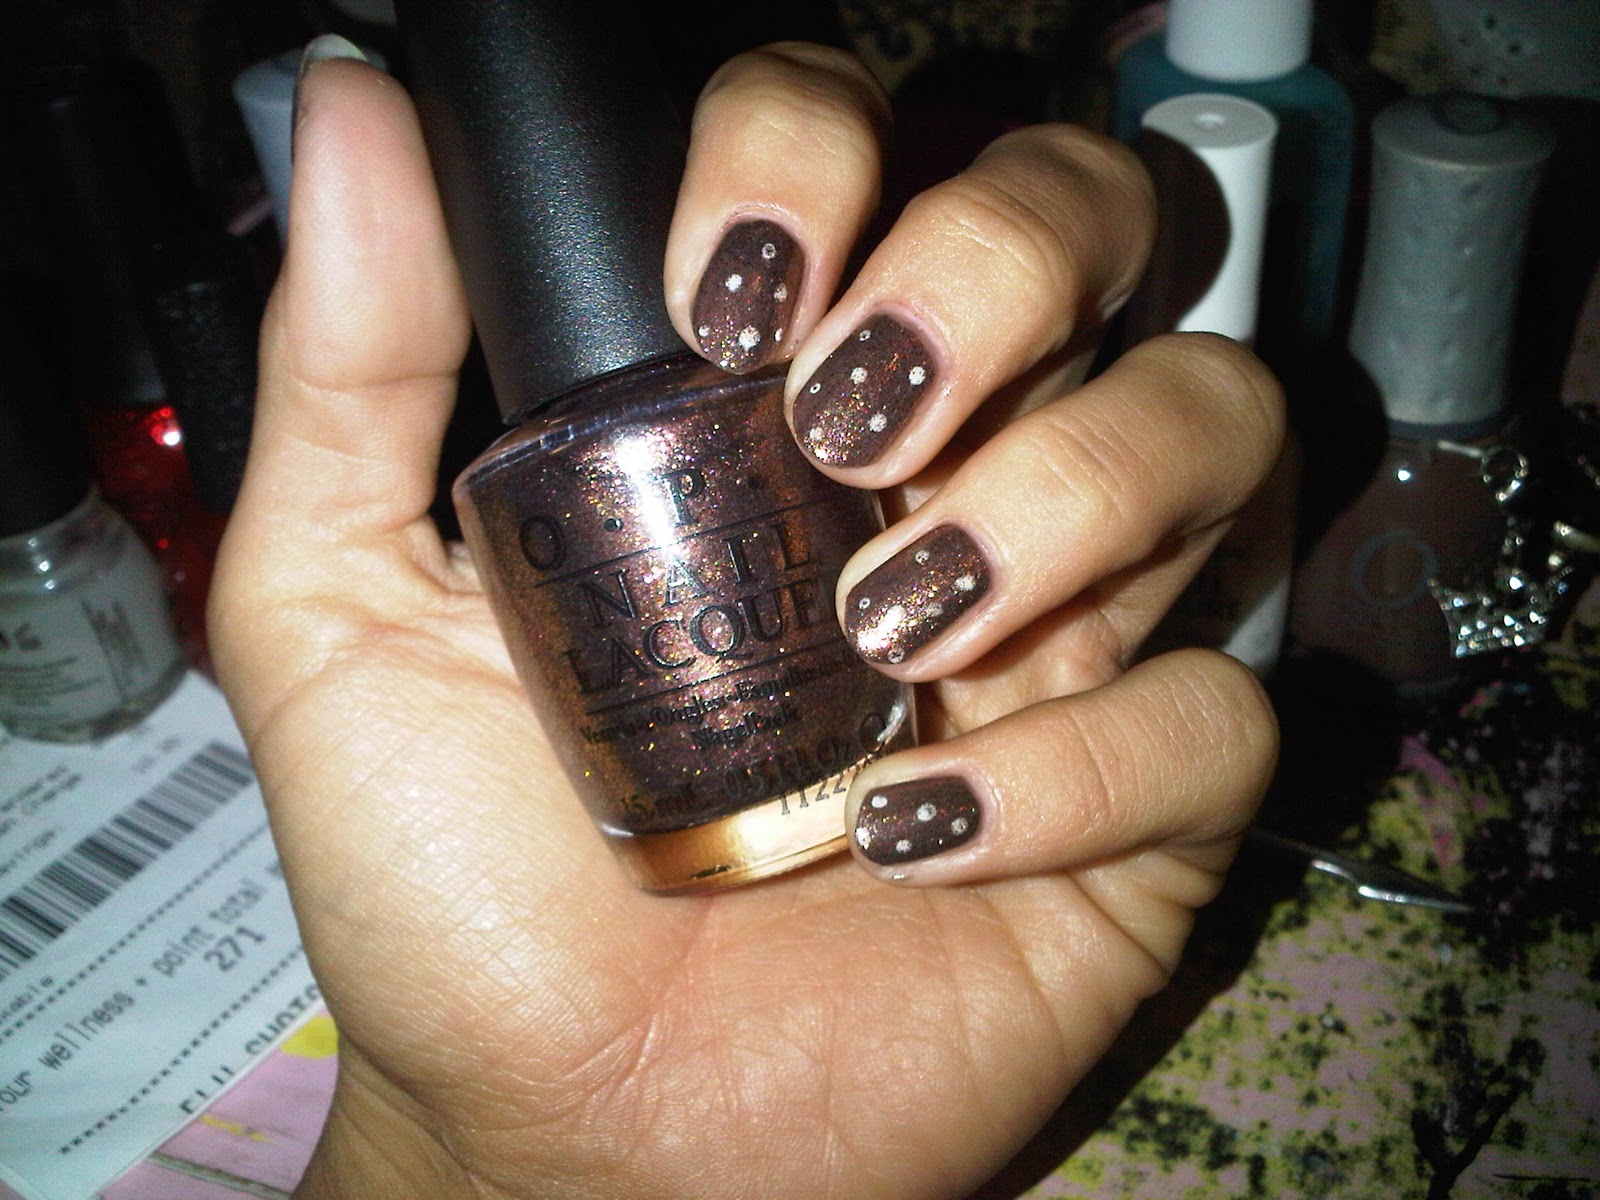 2. "Cocoa Karma" by OPI - wide 6